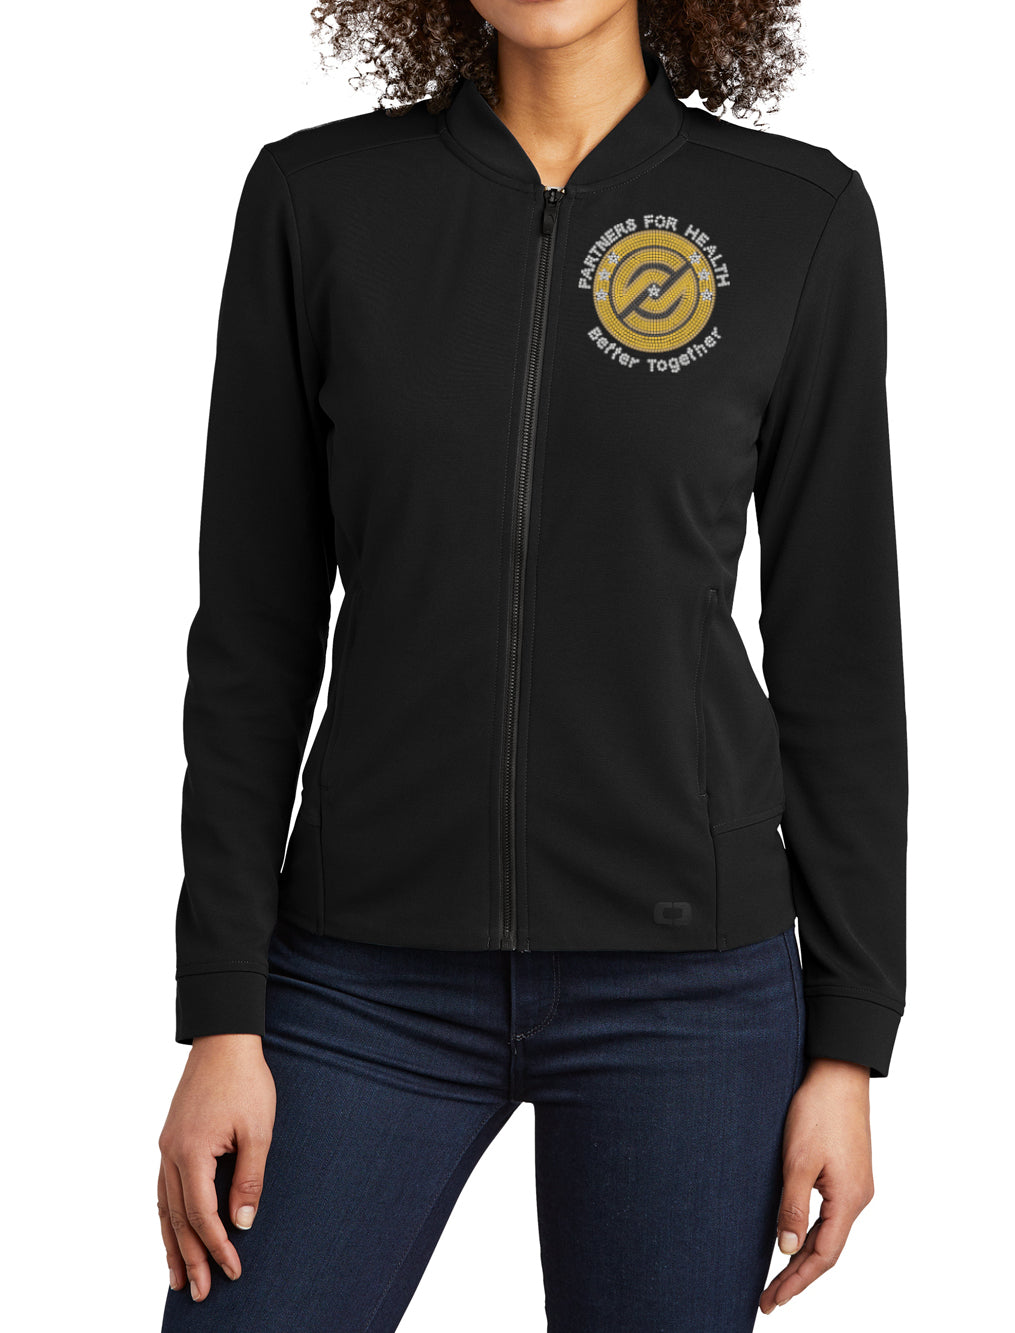 Partners For Health | Bev Vance Level Up Collection | BLING Women's No Hood Full Zip Jacket